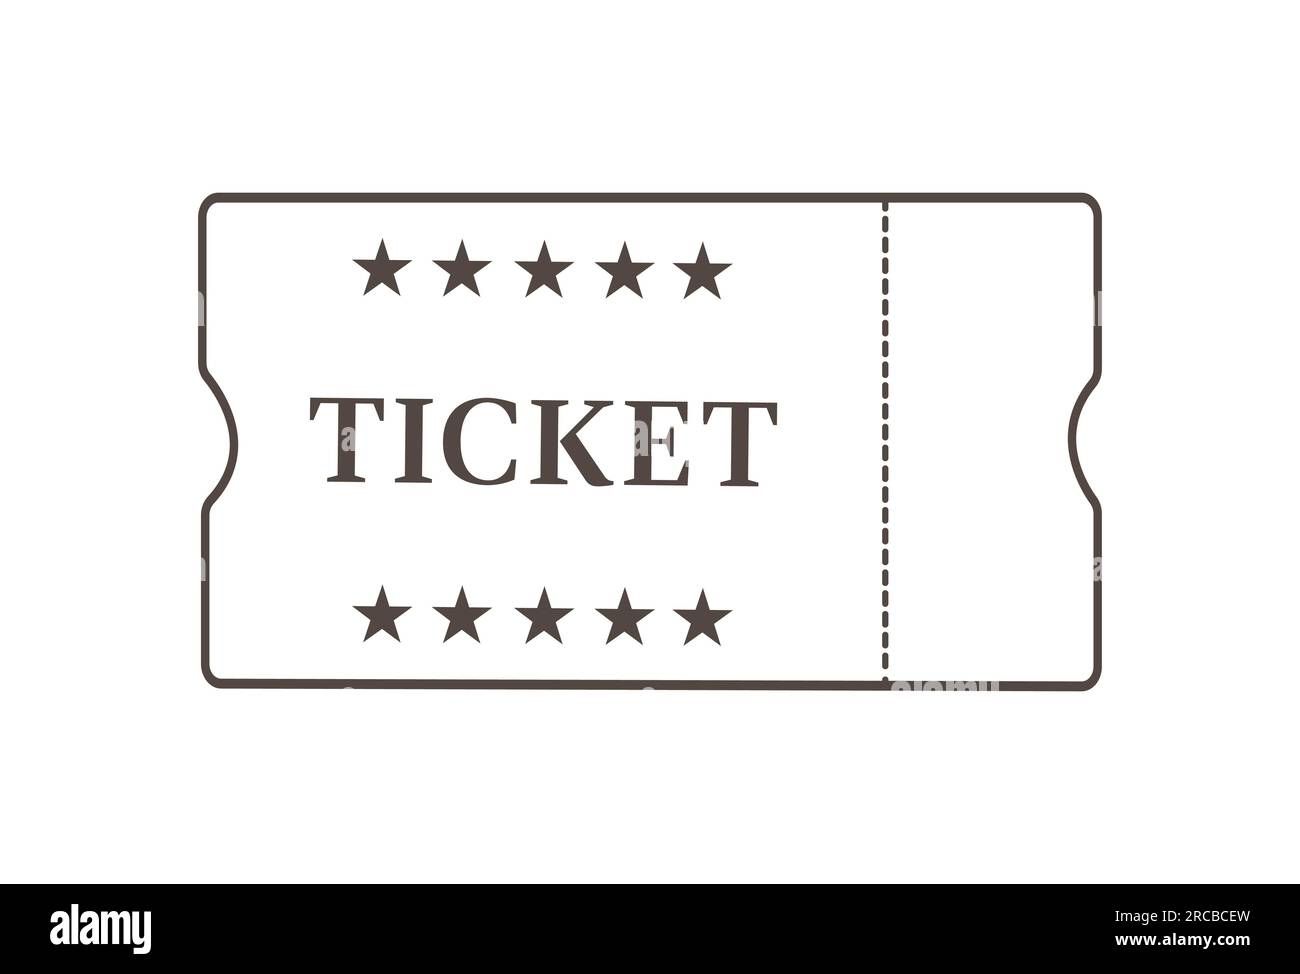 Ticket icon vector illustration in the flat style. Retro ticket stub isolated on a background. Stock Vector